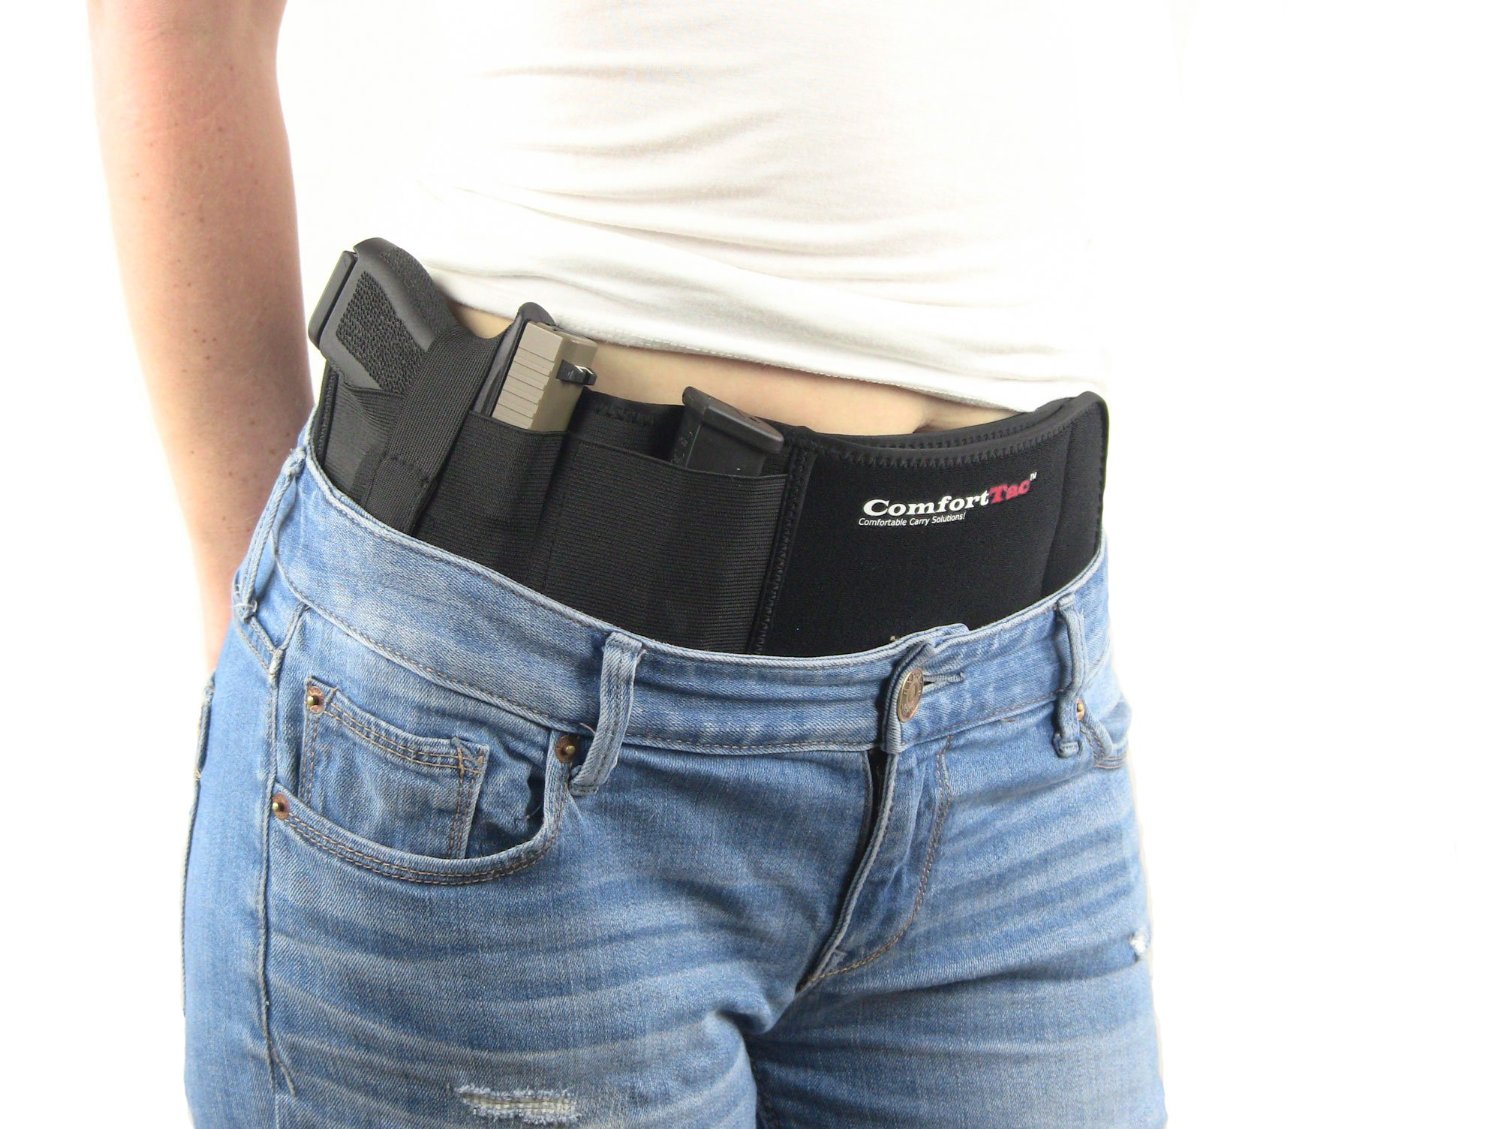 Best Holsters For Women: Conceal Carry Holsters for Women Reviews ...